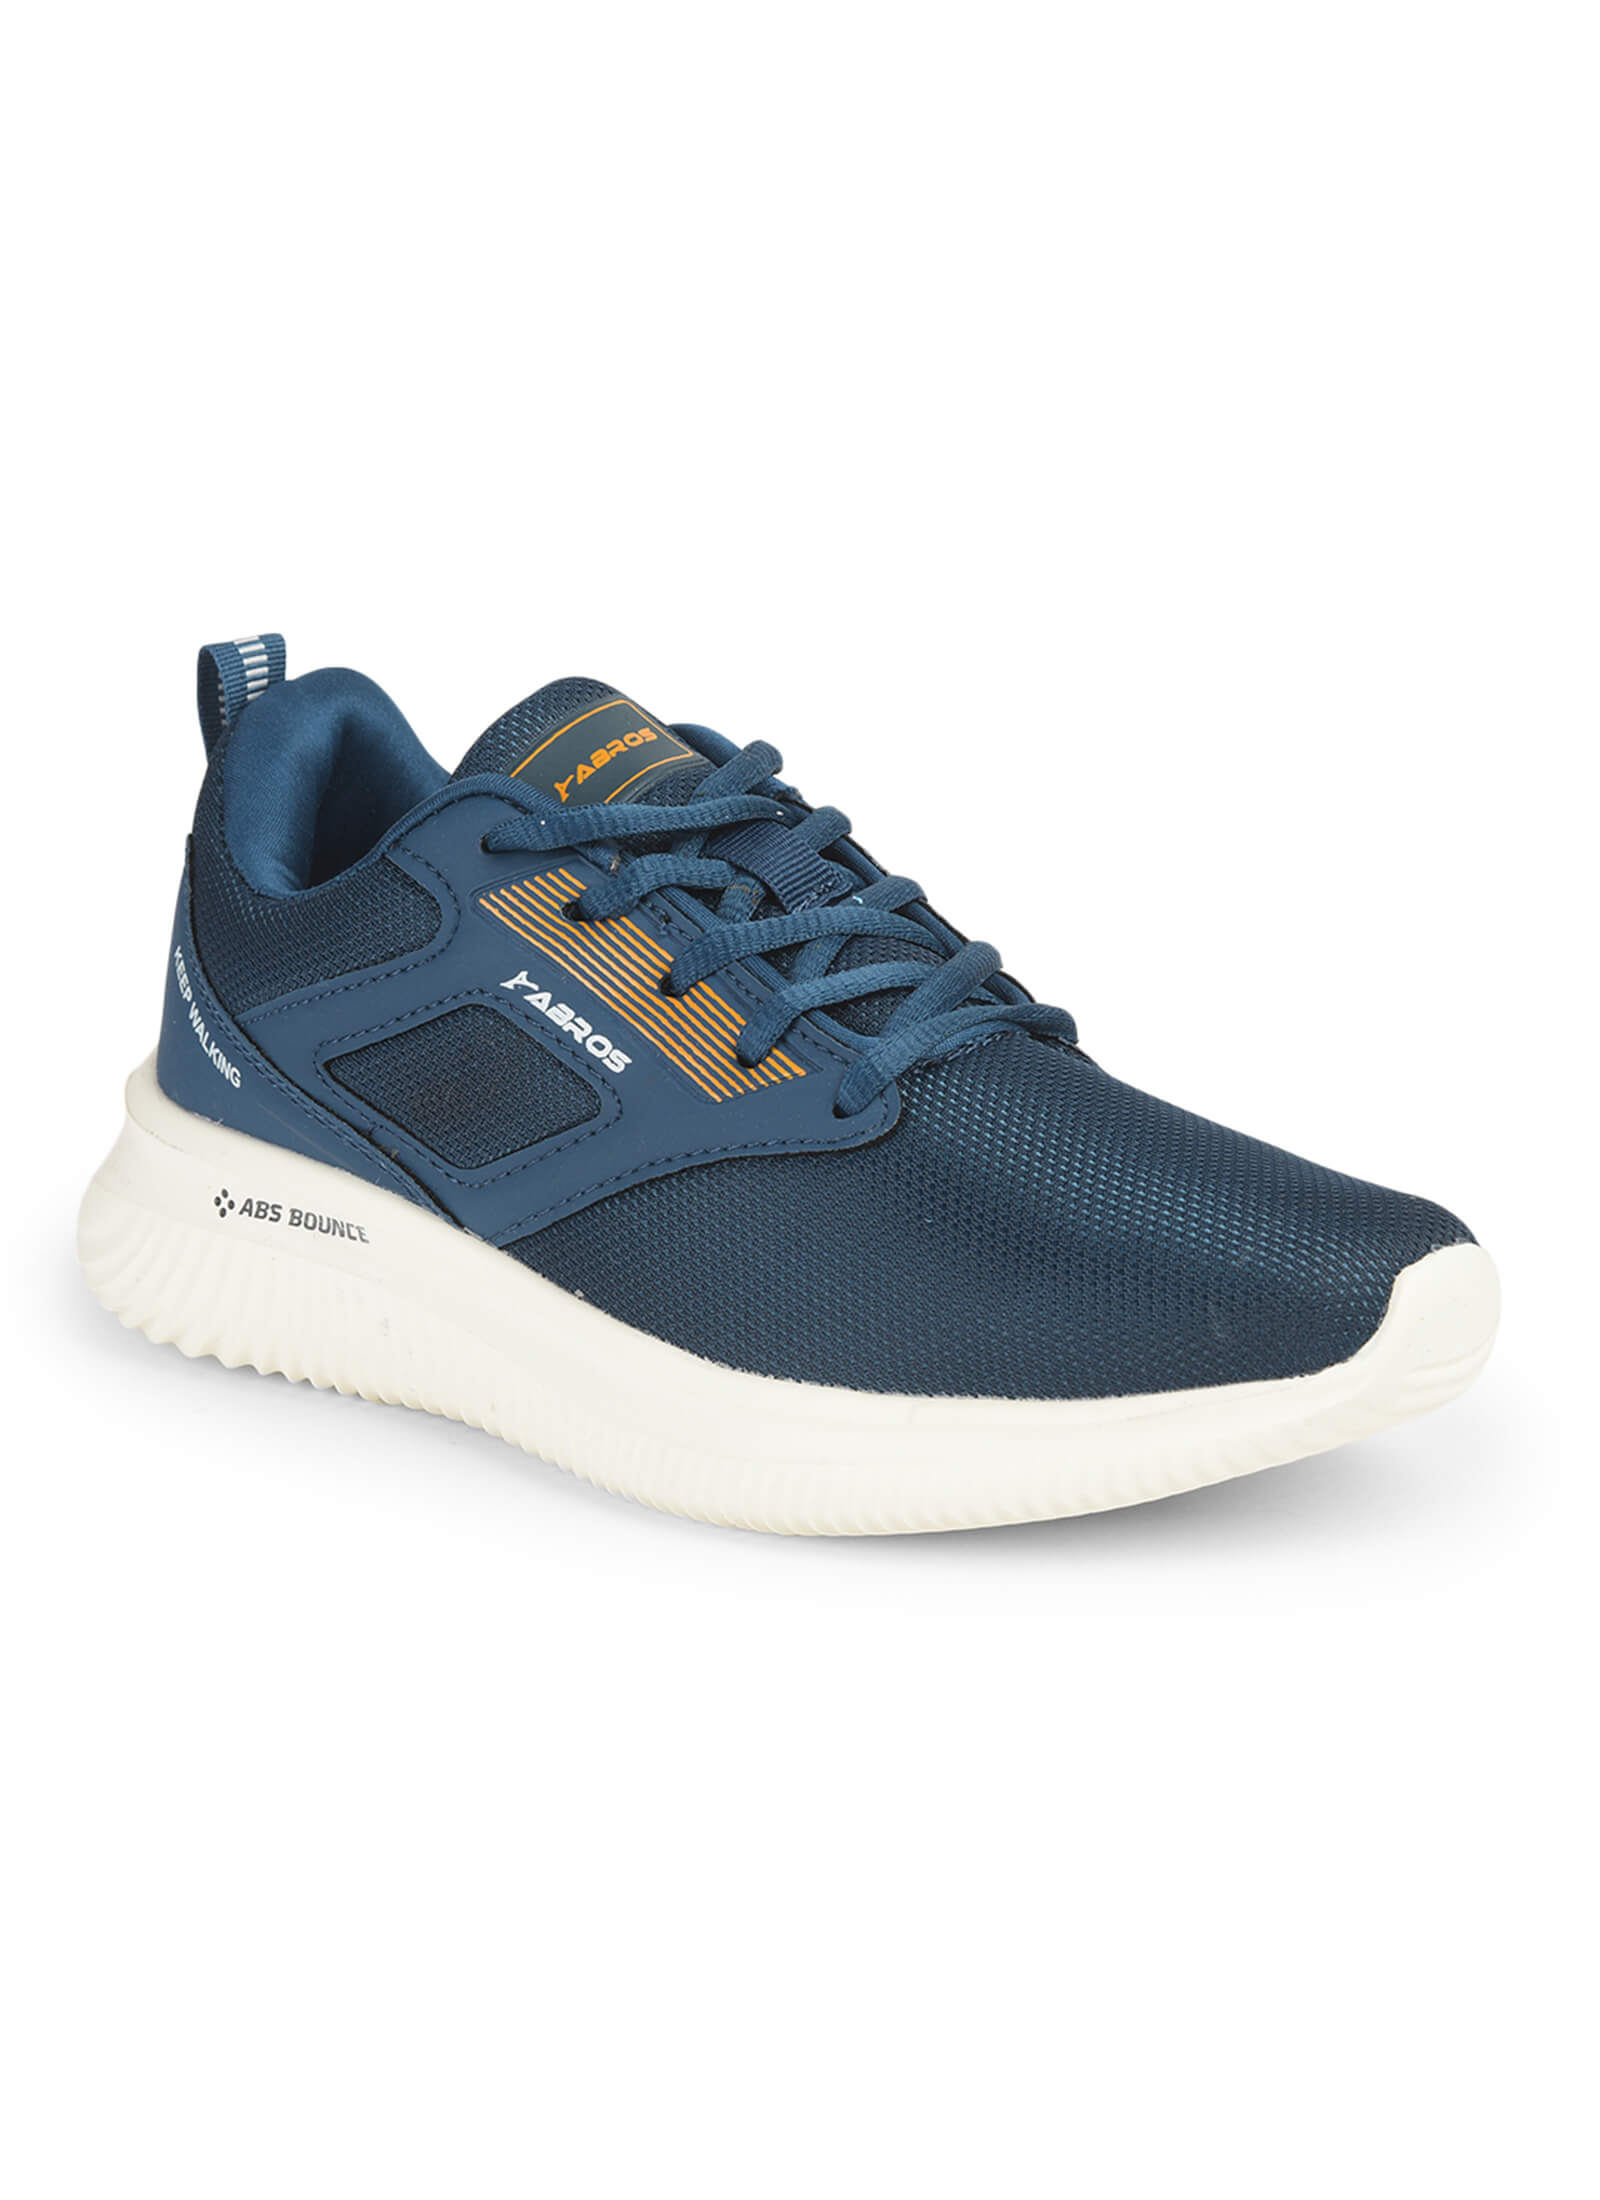 Glide-N Sports Shoes For Men